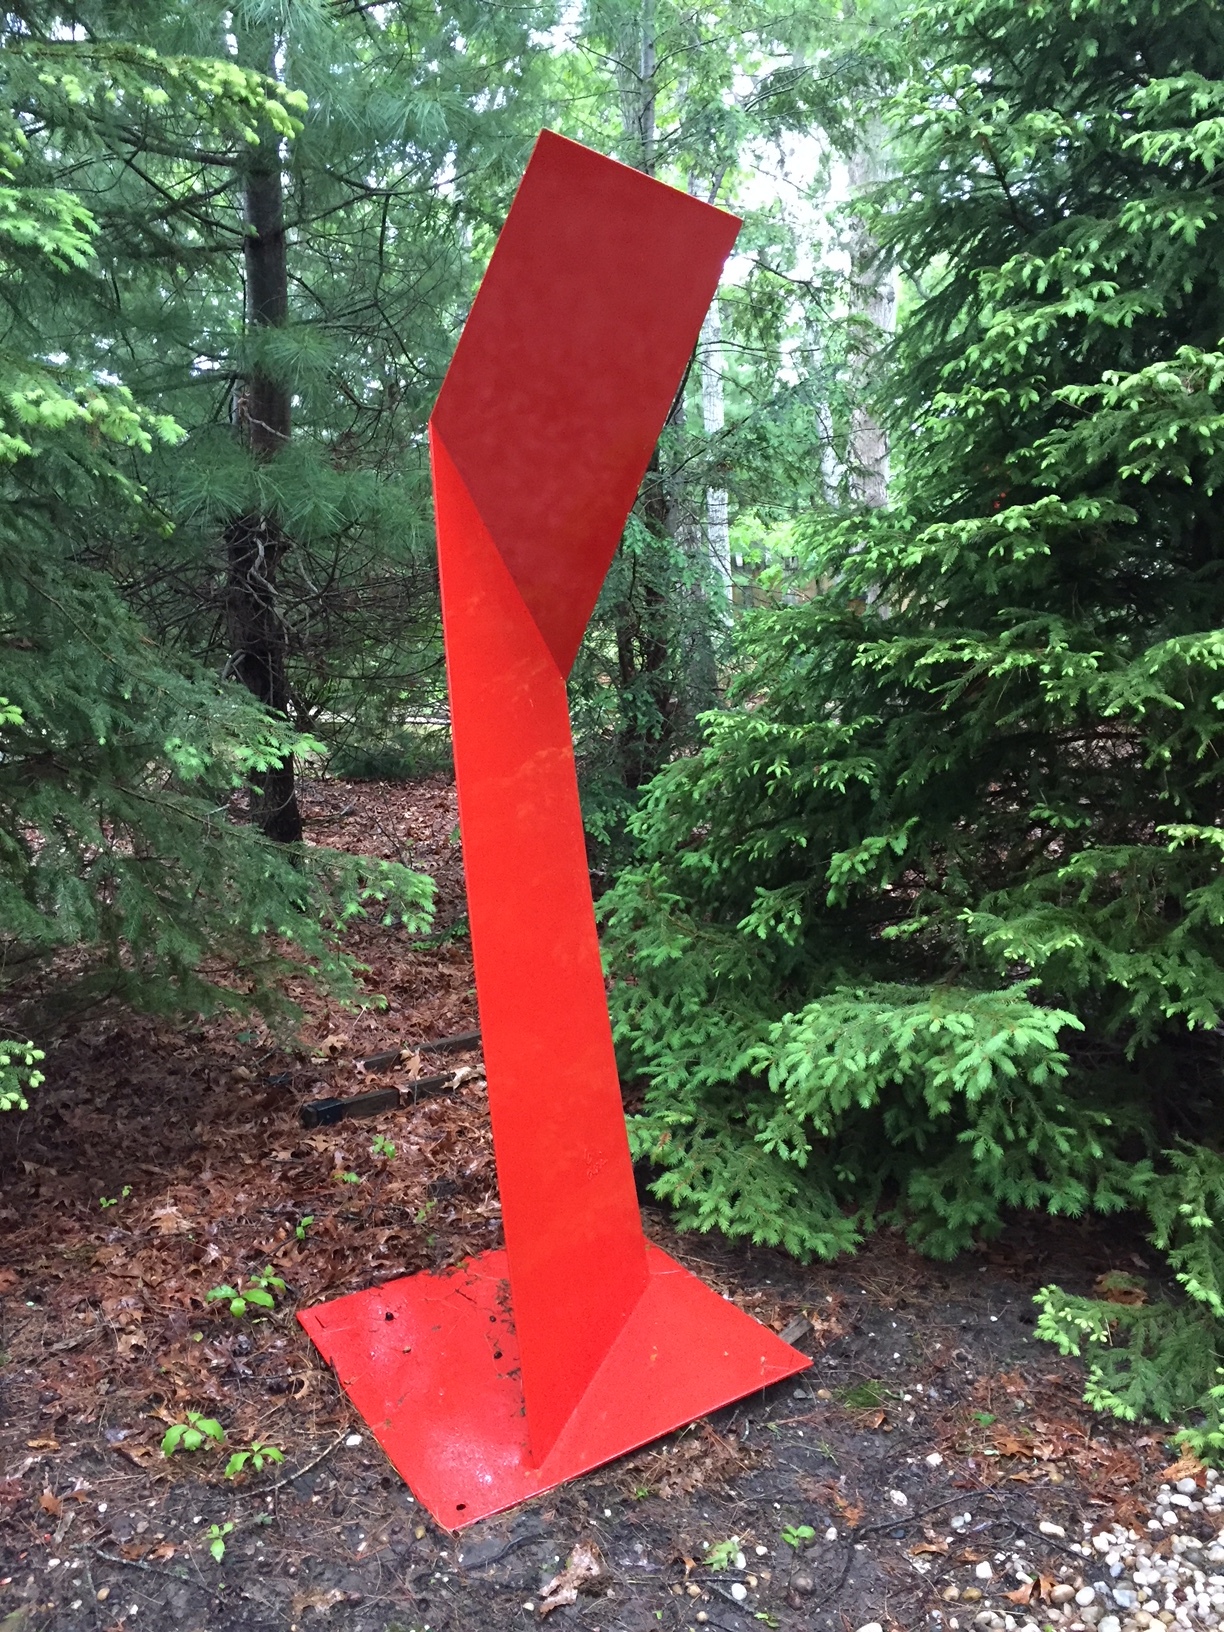 Pure Form #5, 2014, painted welded steel, 96 x 28 x 28 in SOLD